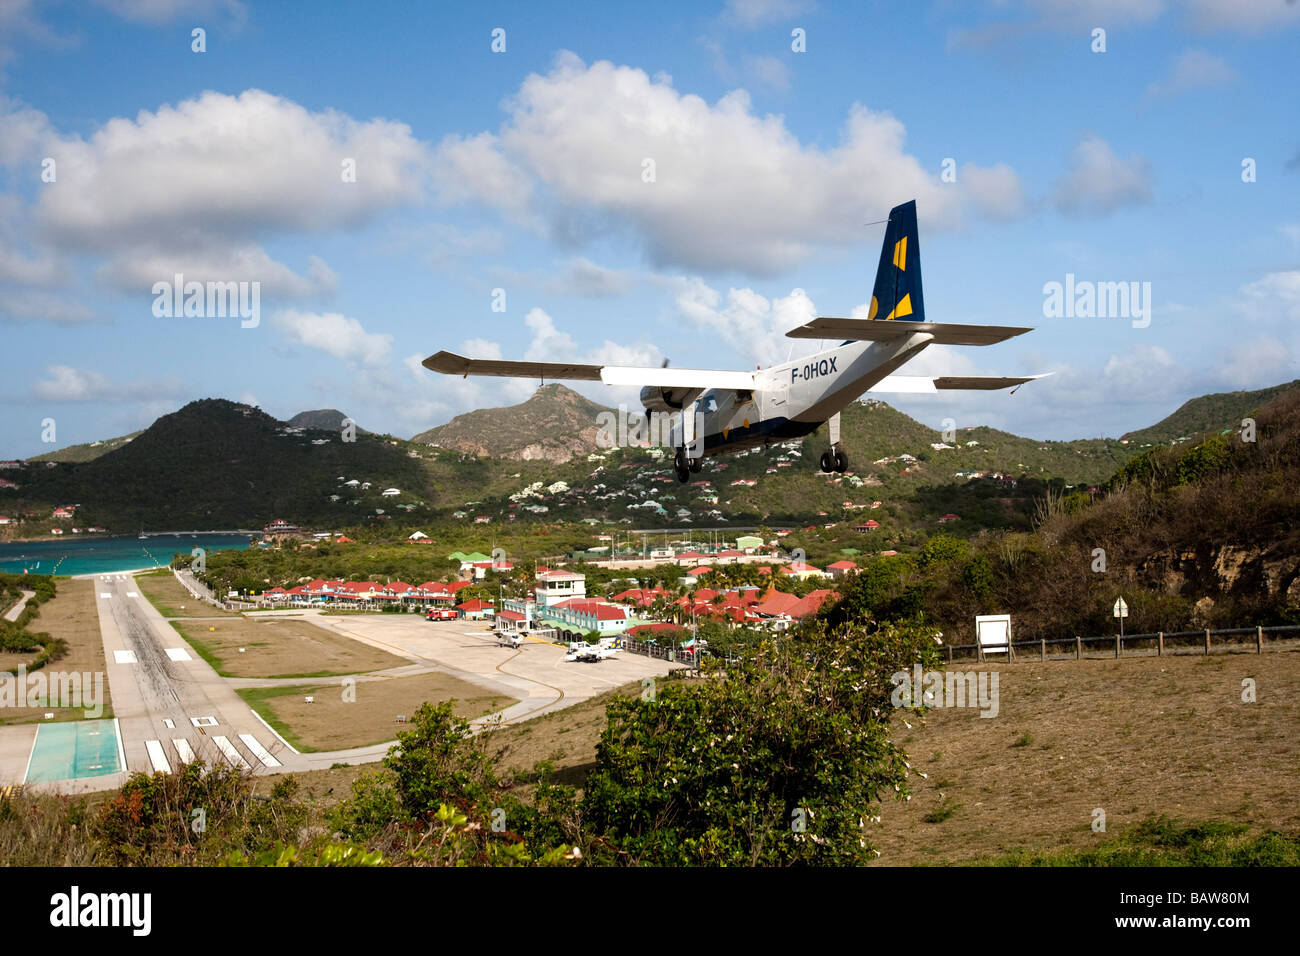 Light Islander commuter aircraft on approach to runway St Barts Stock Photo